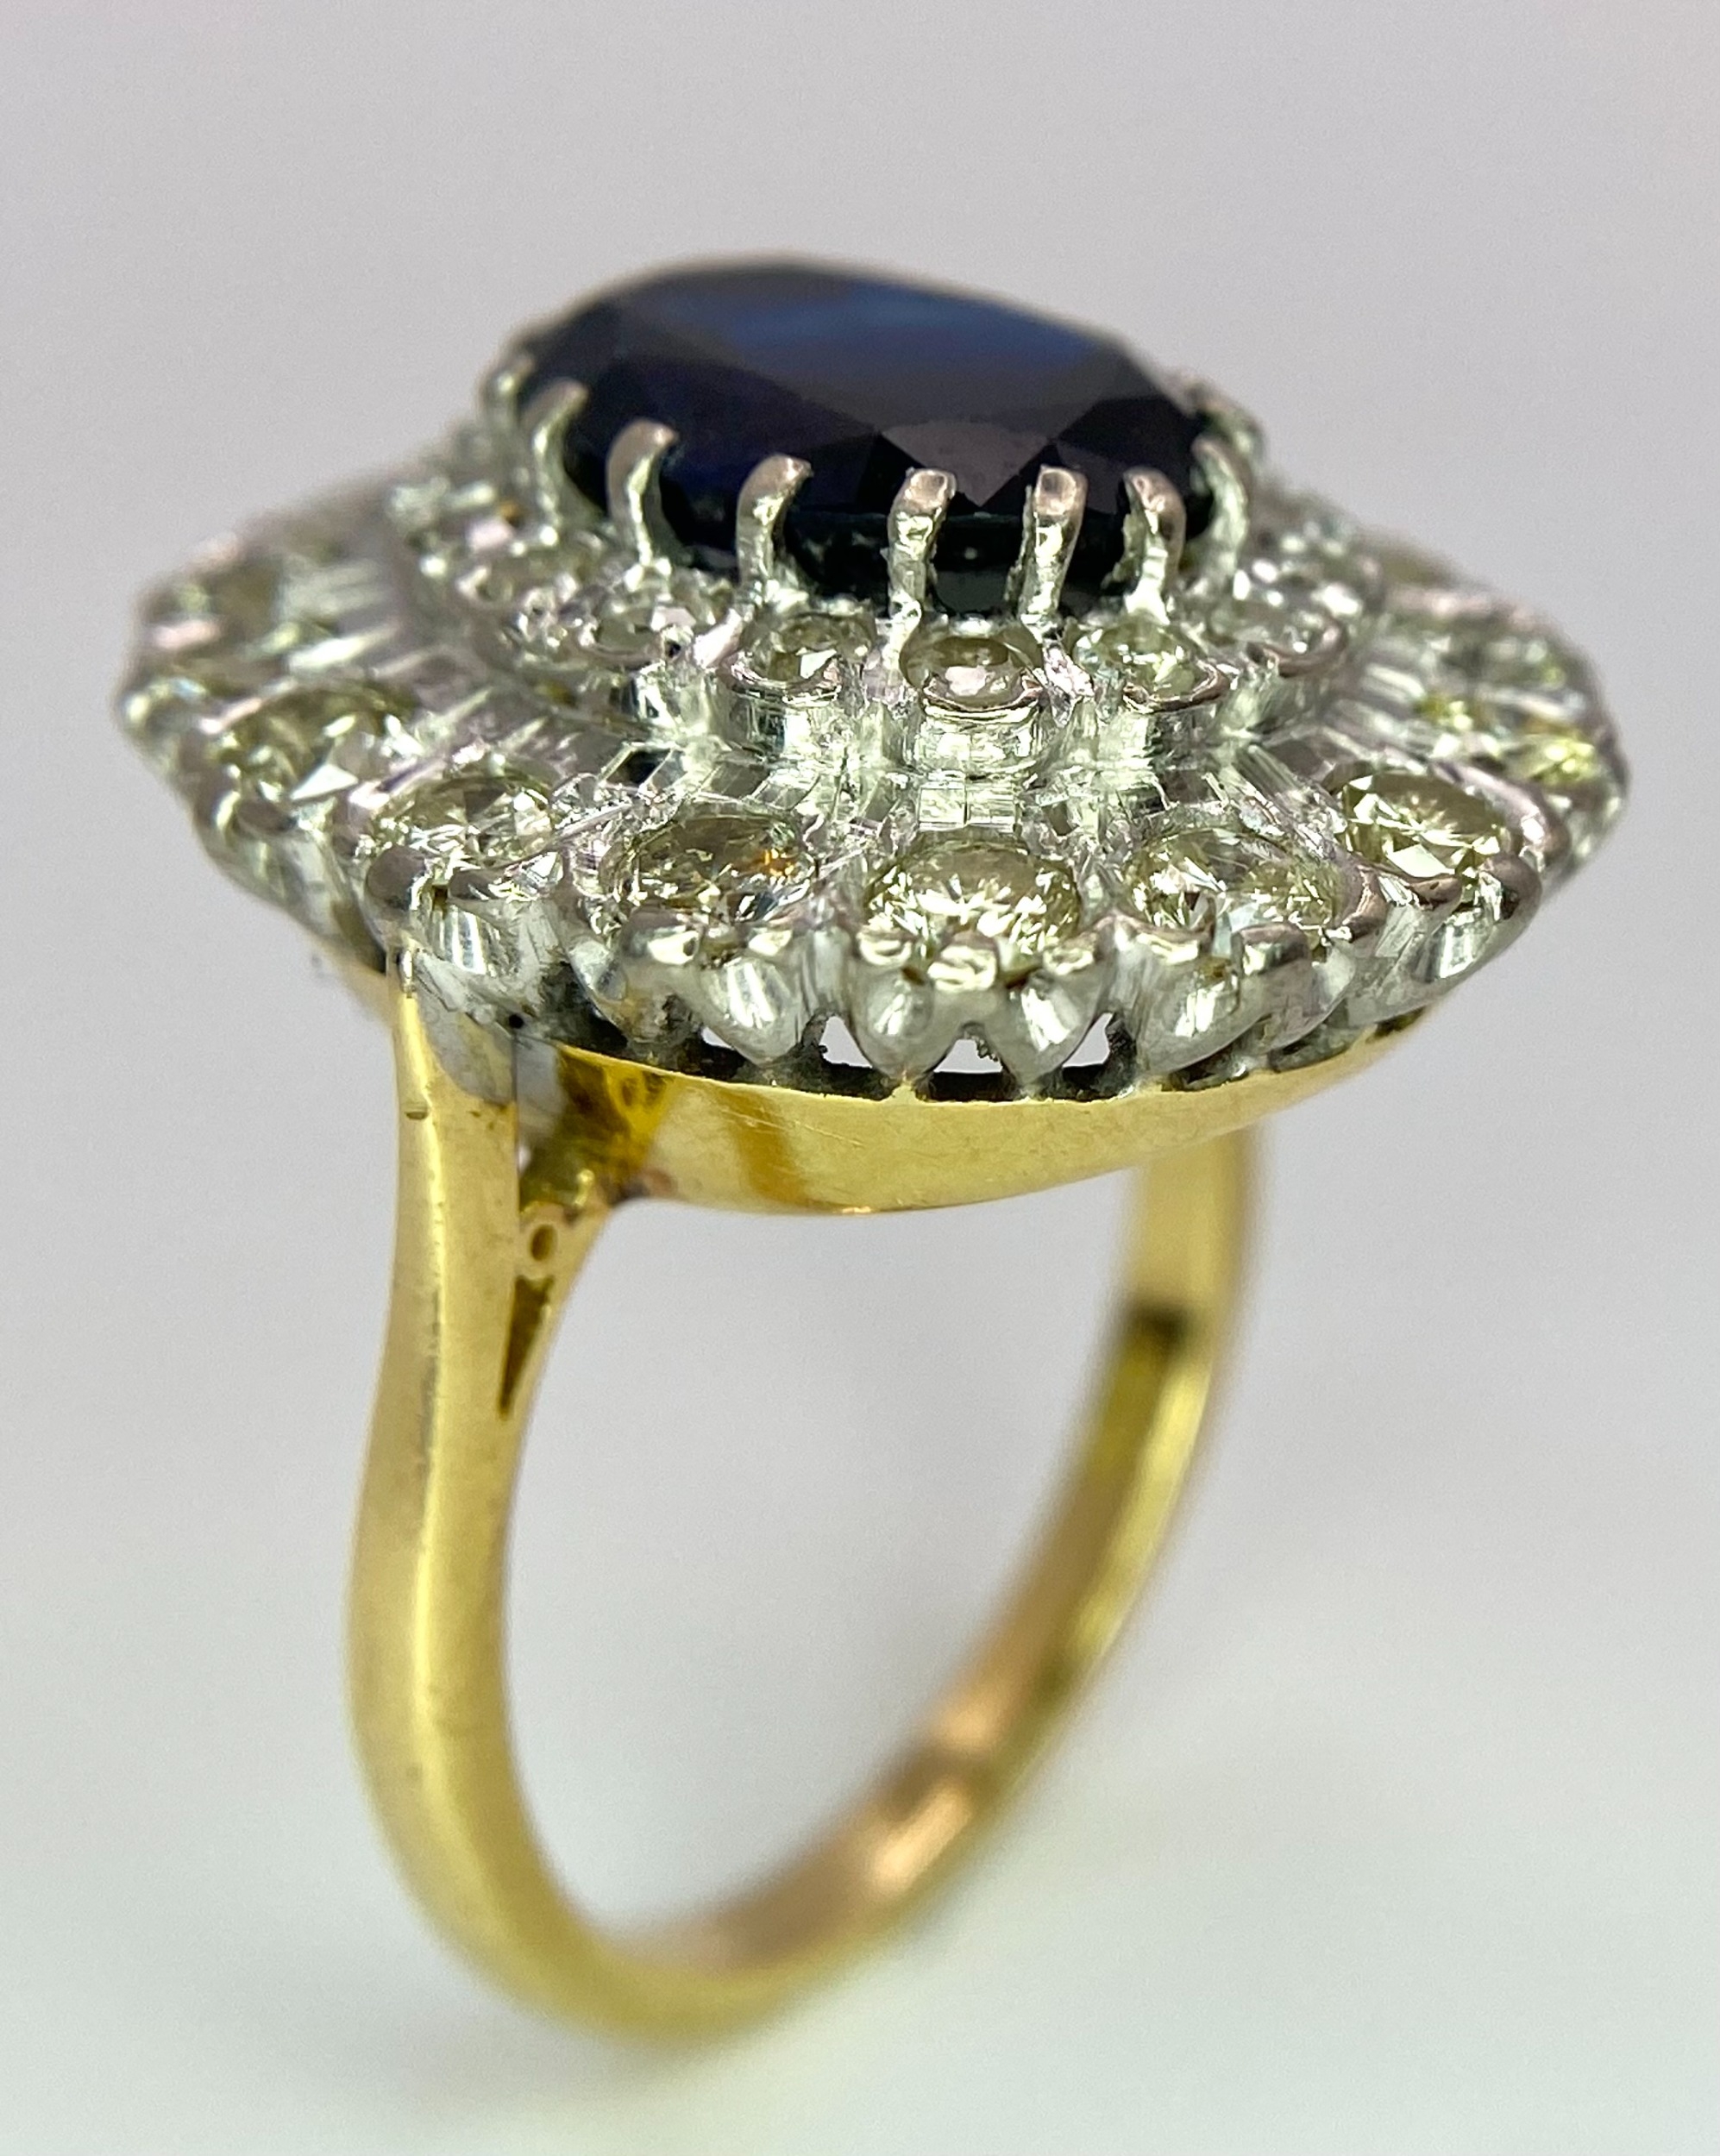 A Breath-Taking 18K Yellow Gold, Sapphire and Diamond Dress Ring. Central oval cut 3ct sapphire with - Image 4 of 9